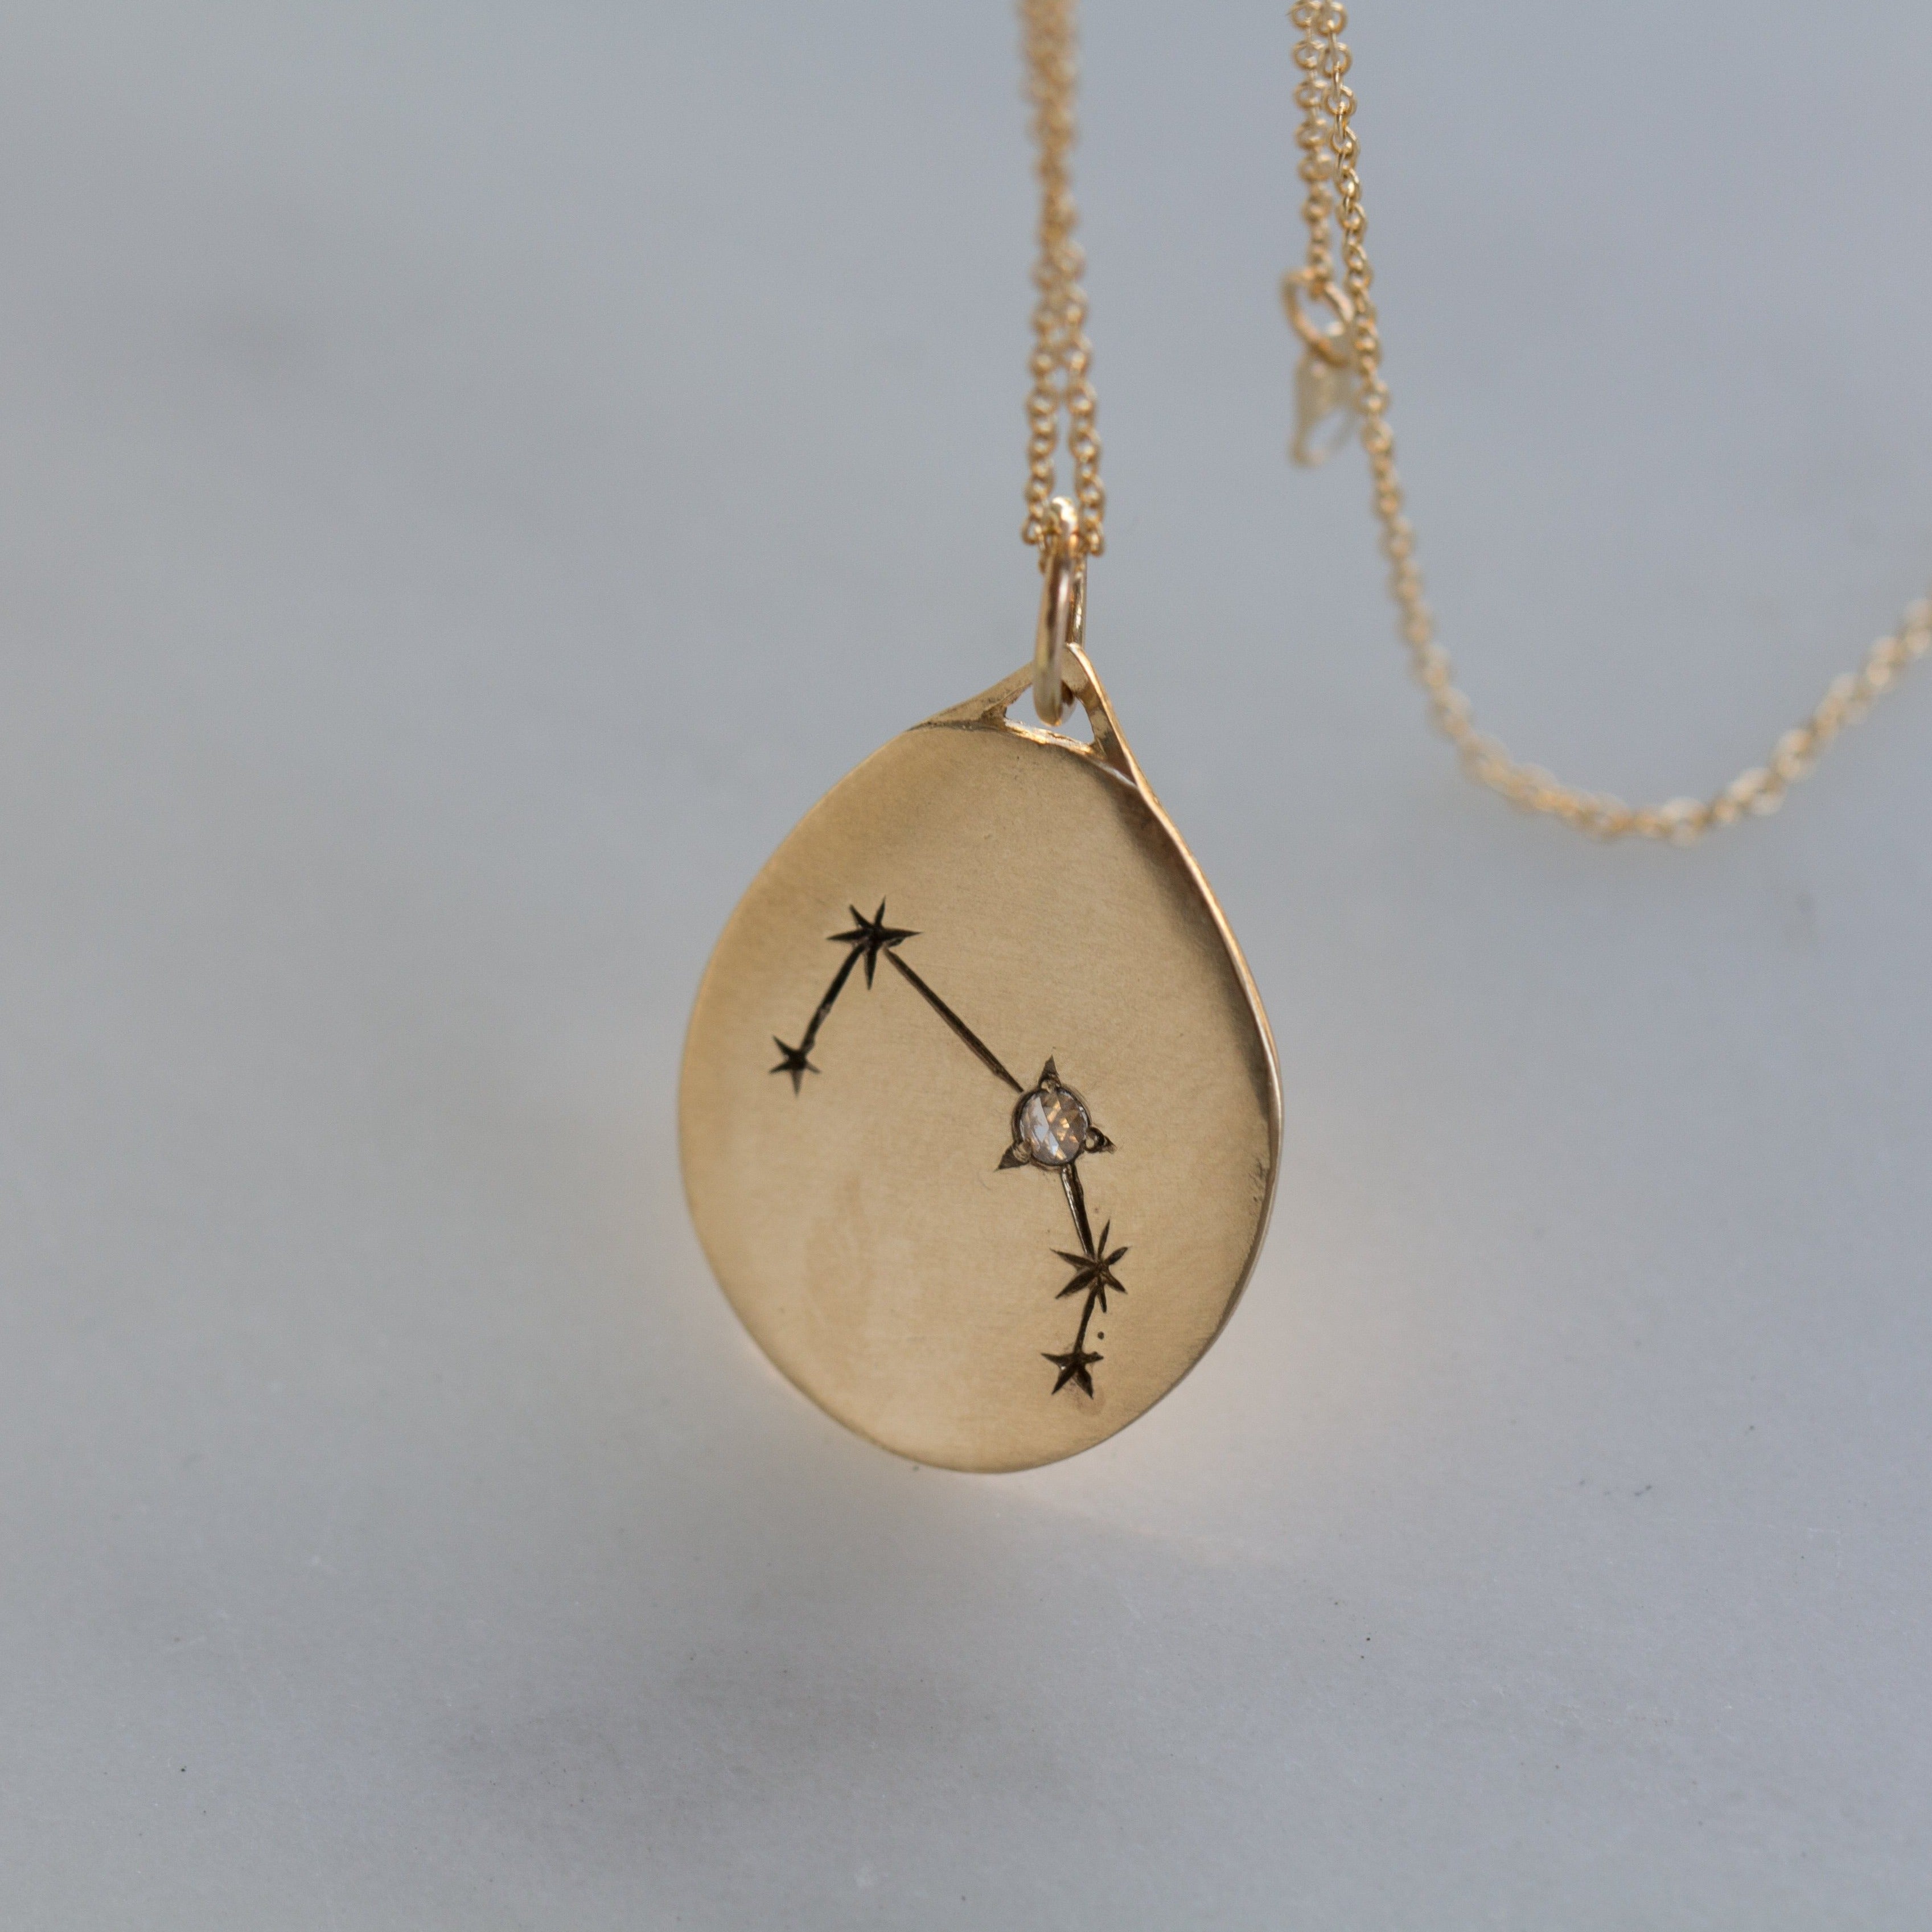 Aries Celestial Zodiac Necklace | 12th HOUSE | Mystical Fine Jewelry | Gold constellation necklace | Fine zodiac necklace 14k gold constellation necklace Constellation necklace Aries constellation necklace Gold Aries constellation necklace |